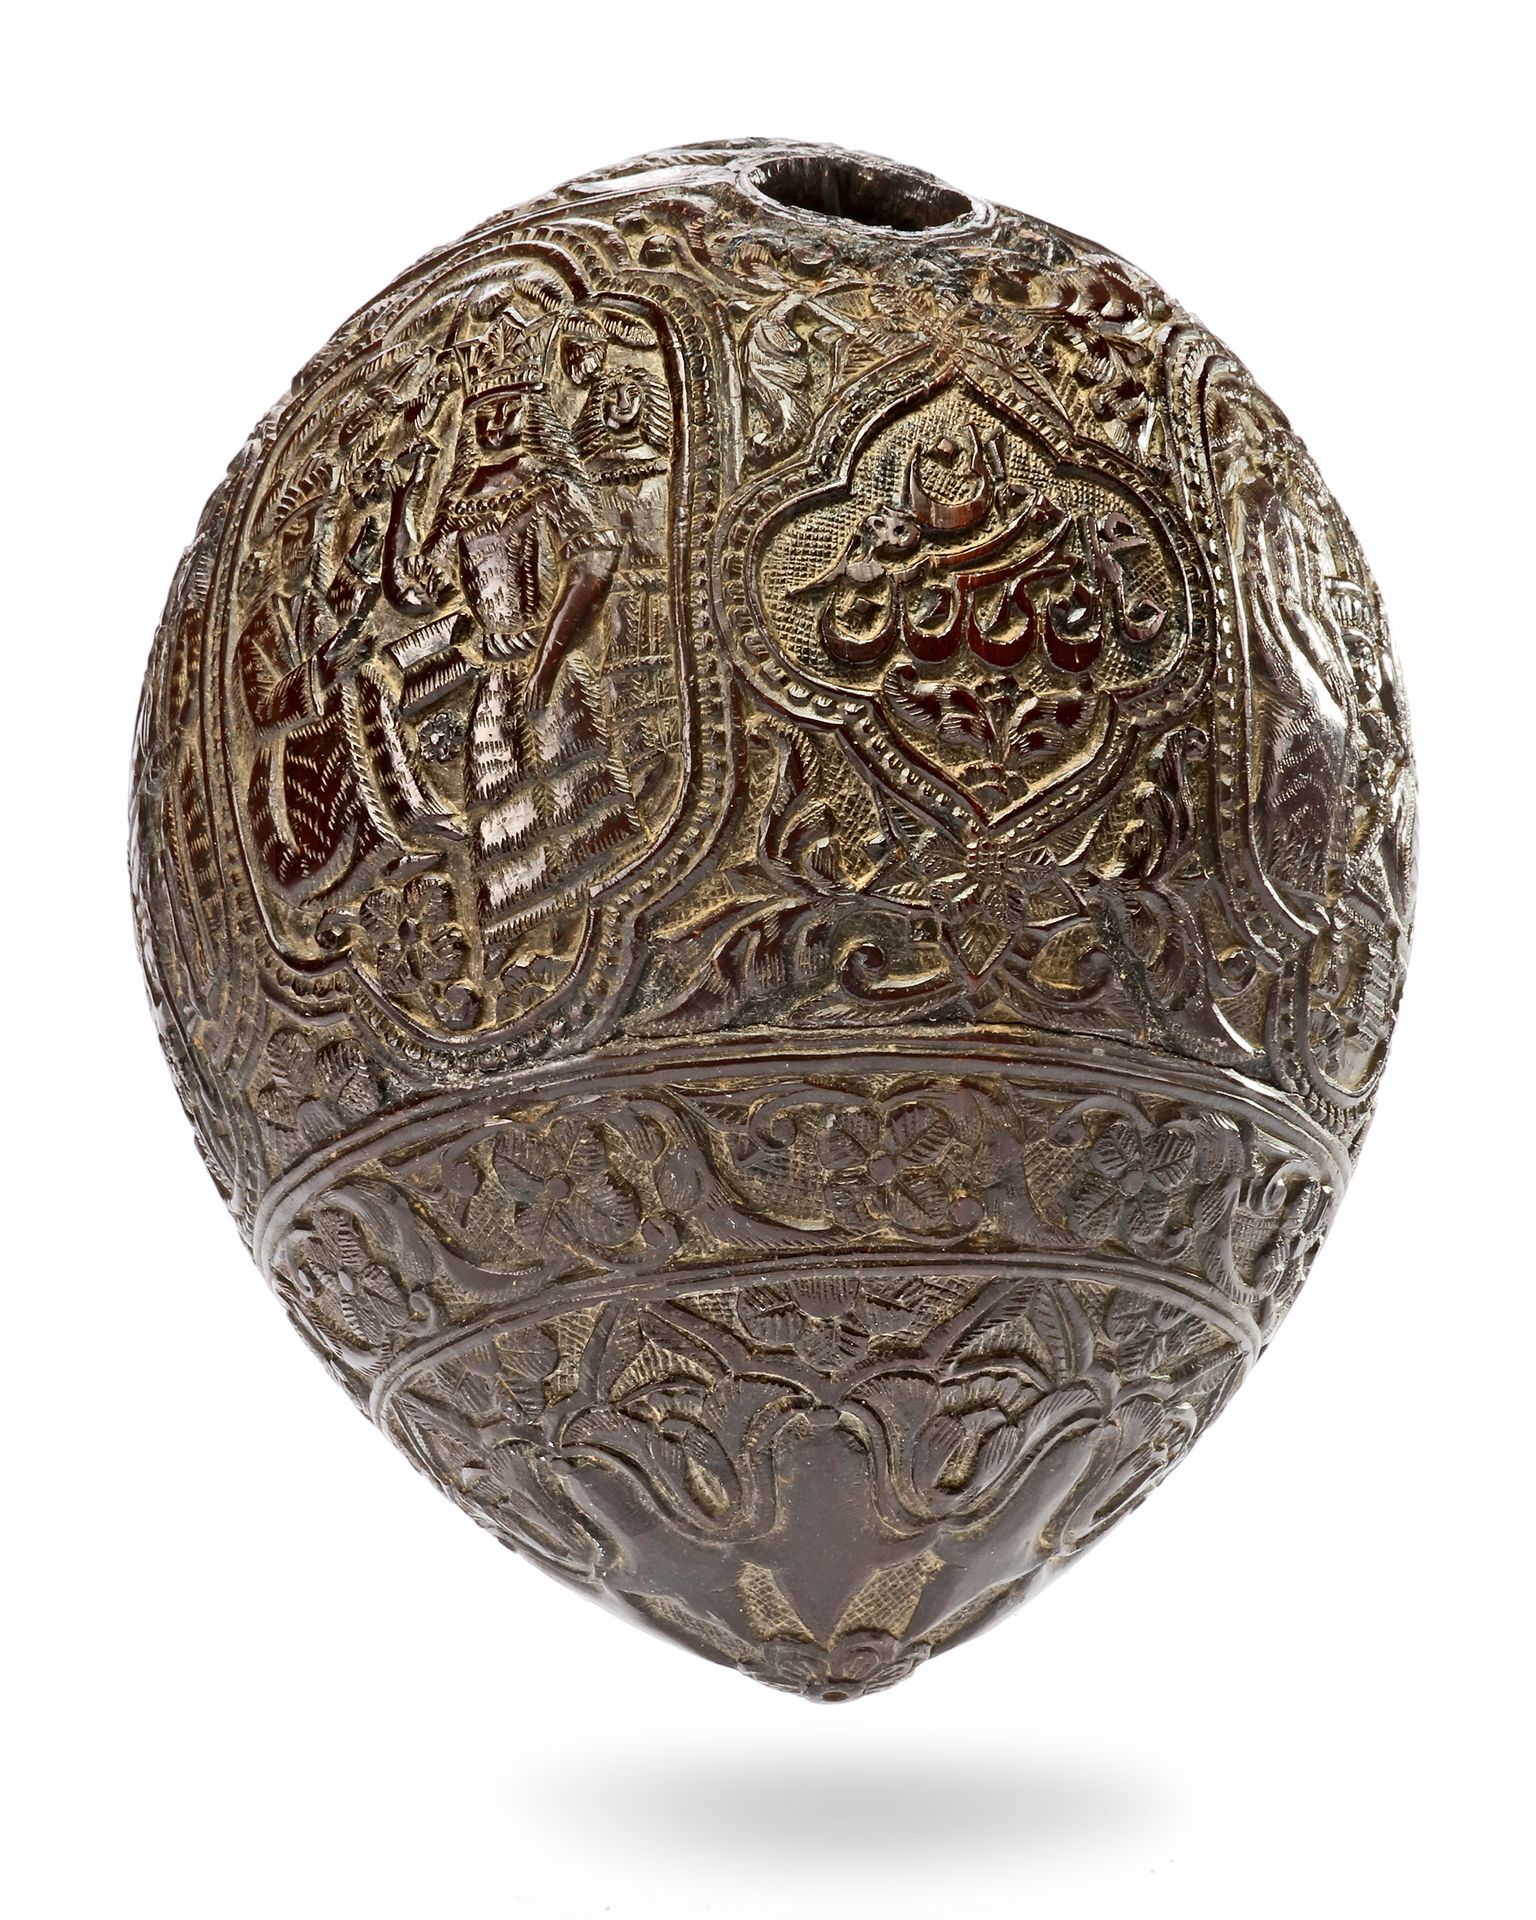 A QAJAR CARVED COCONUT HUQQA BASE, PERSIA, EARLY 19TH CENTURY Of ovoid form with&hellip;